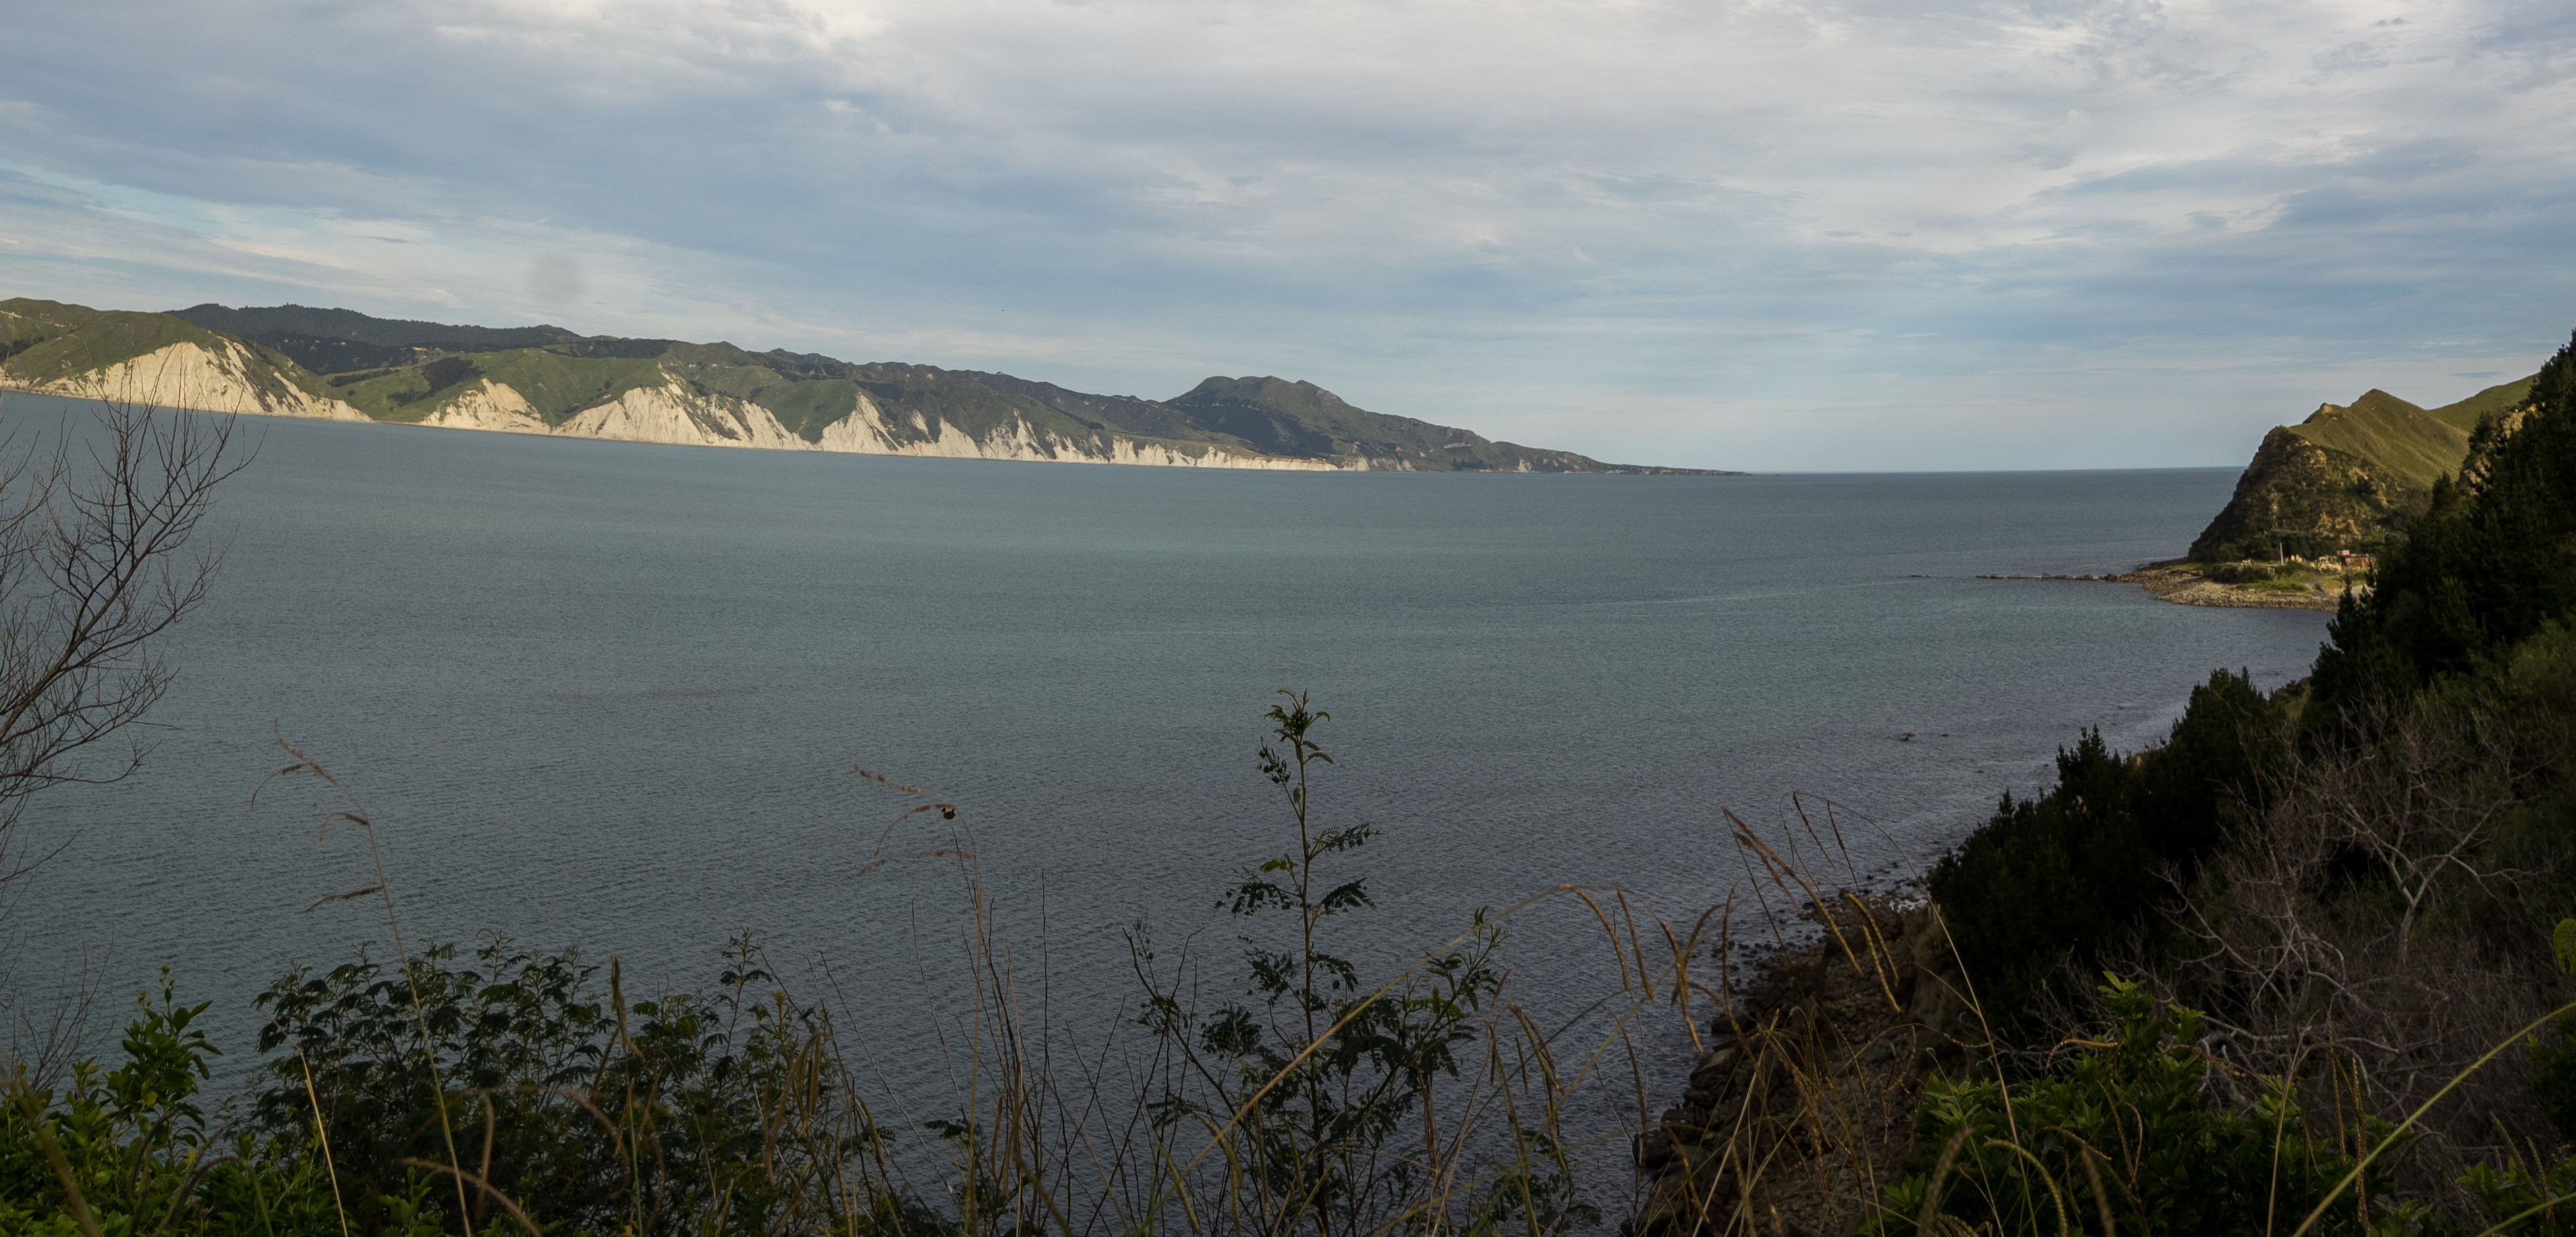 View of Mahia from a cliff across the sea